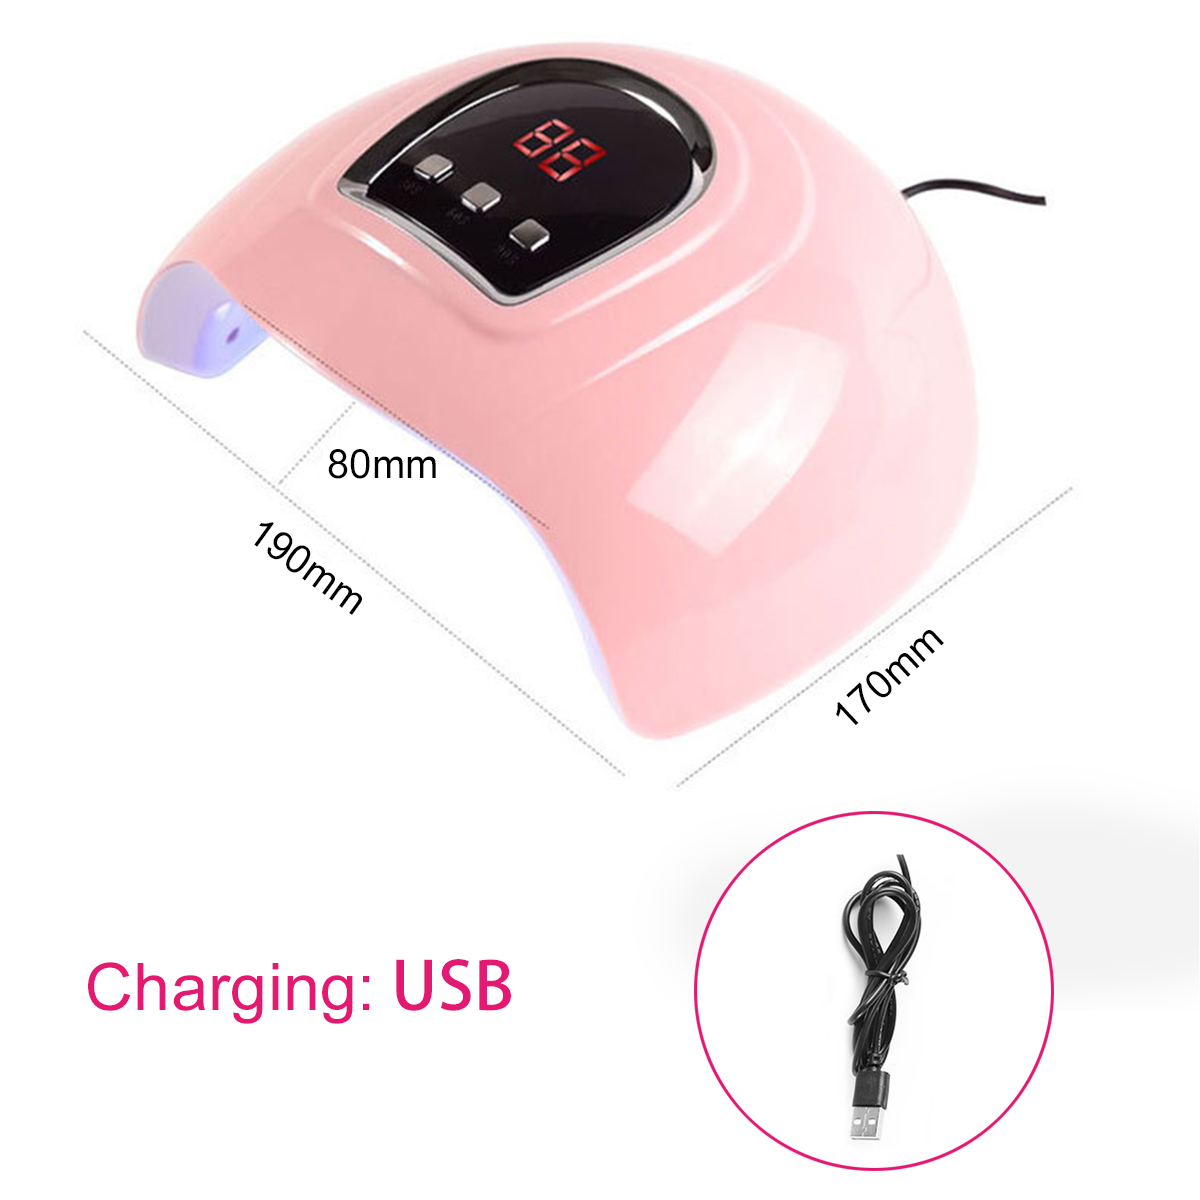 Find 54W UV Nail Lamp 18 UV LED Lights Gel Nail Polish Dryer Curing Manicure for Sale on Gipsybee.com with cryptocurrencies